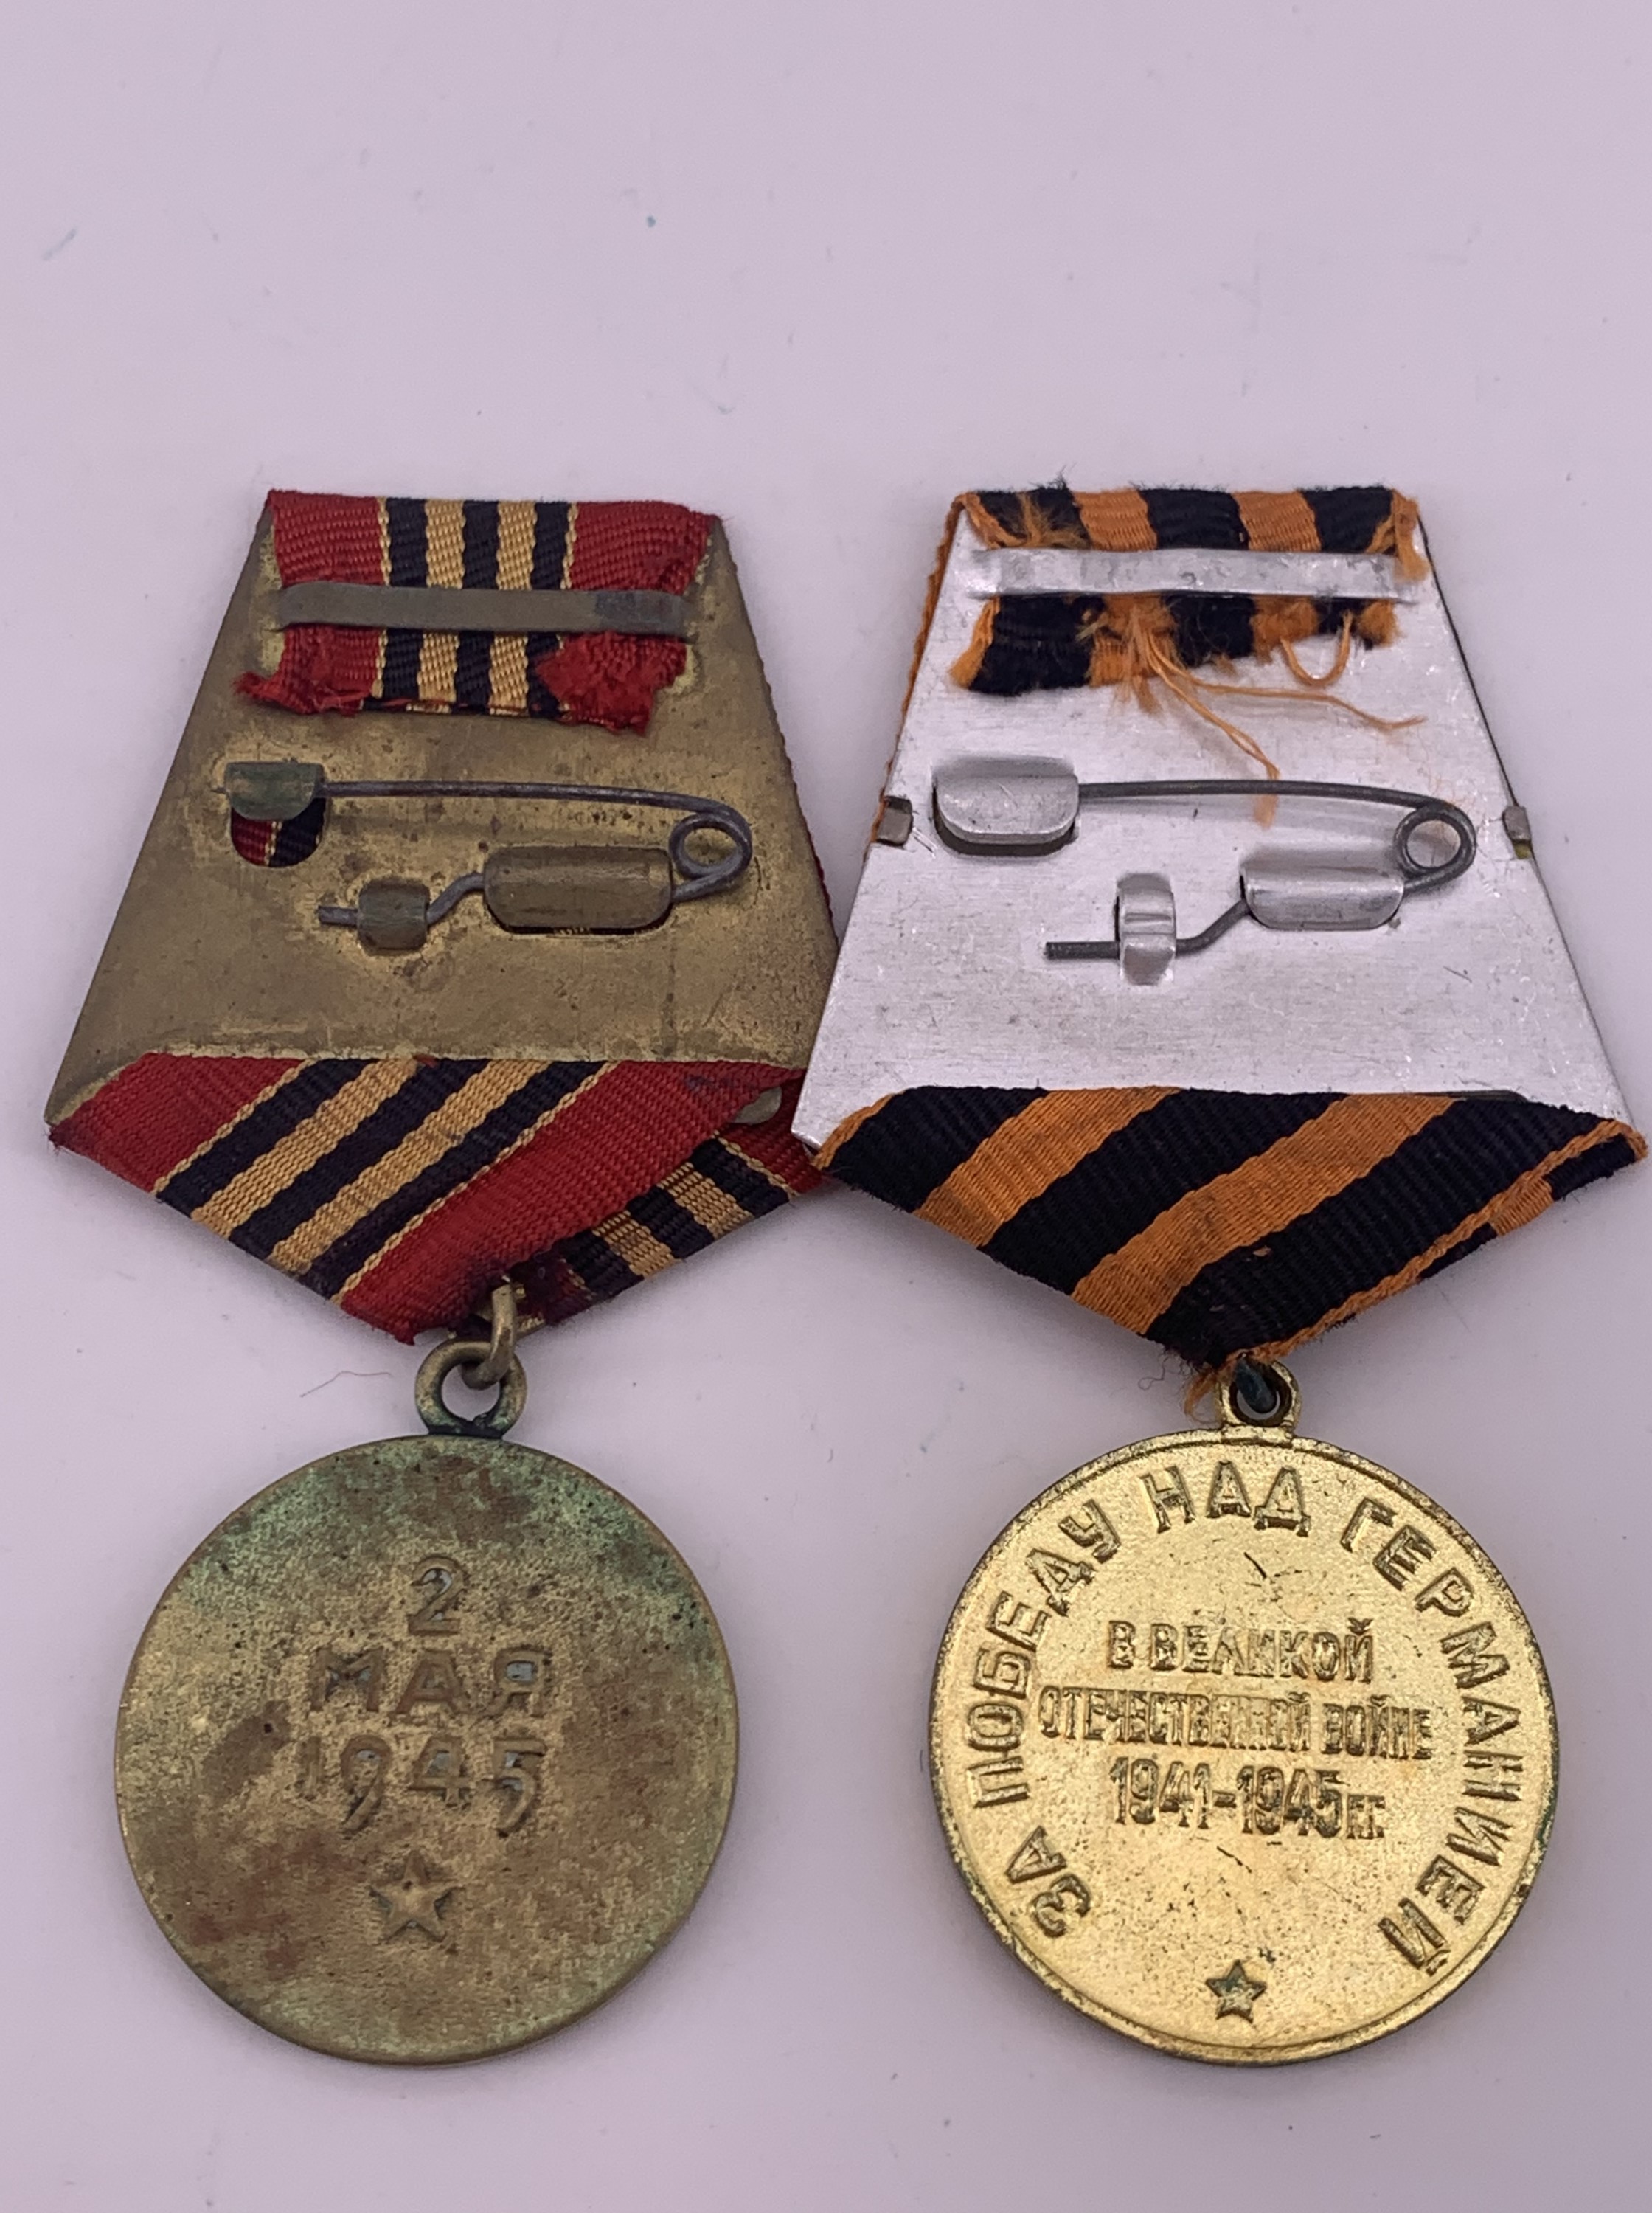 Soviet Medals for the Capture of Berlin and Victory over Germany - Image 2 of 2